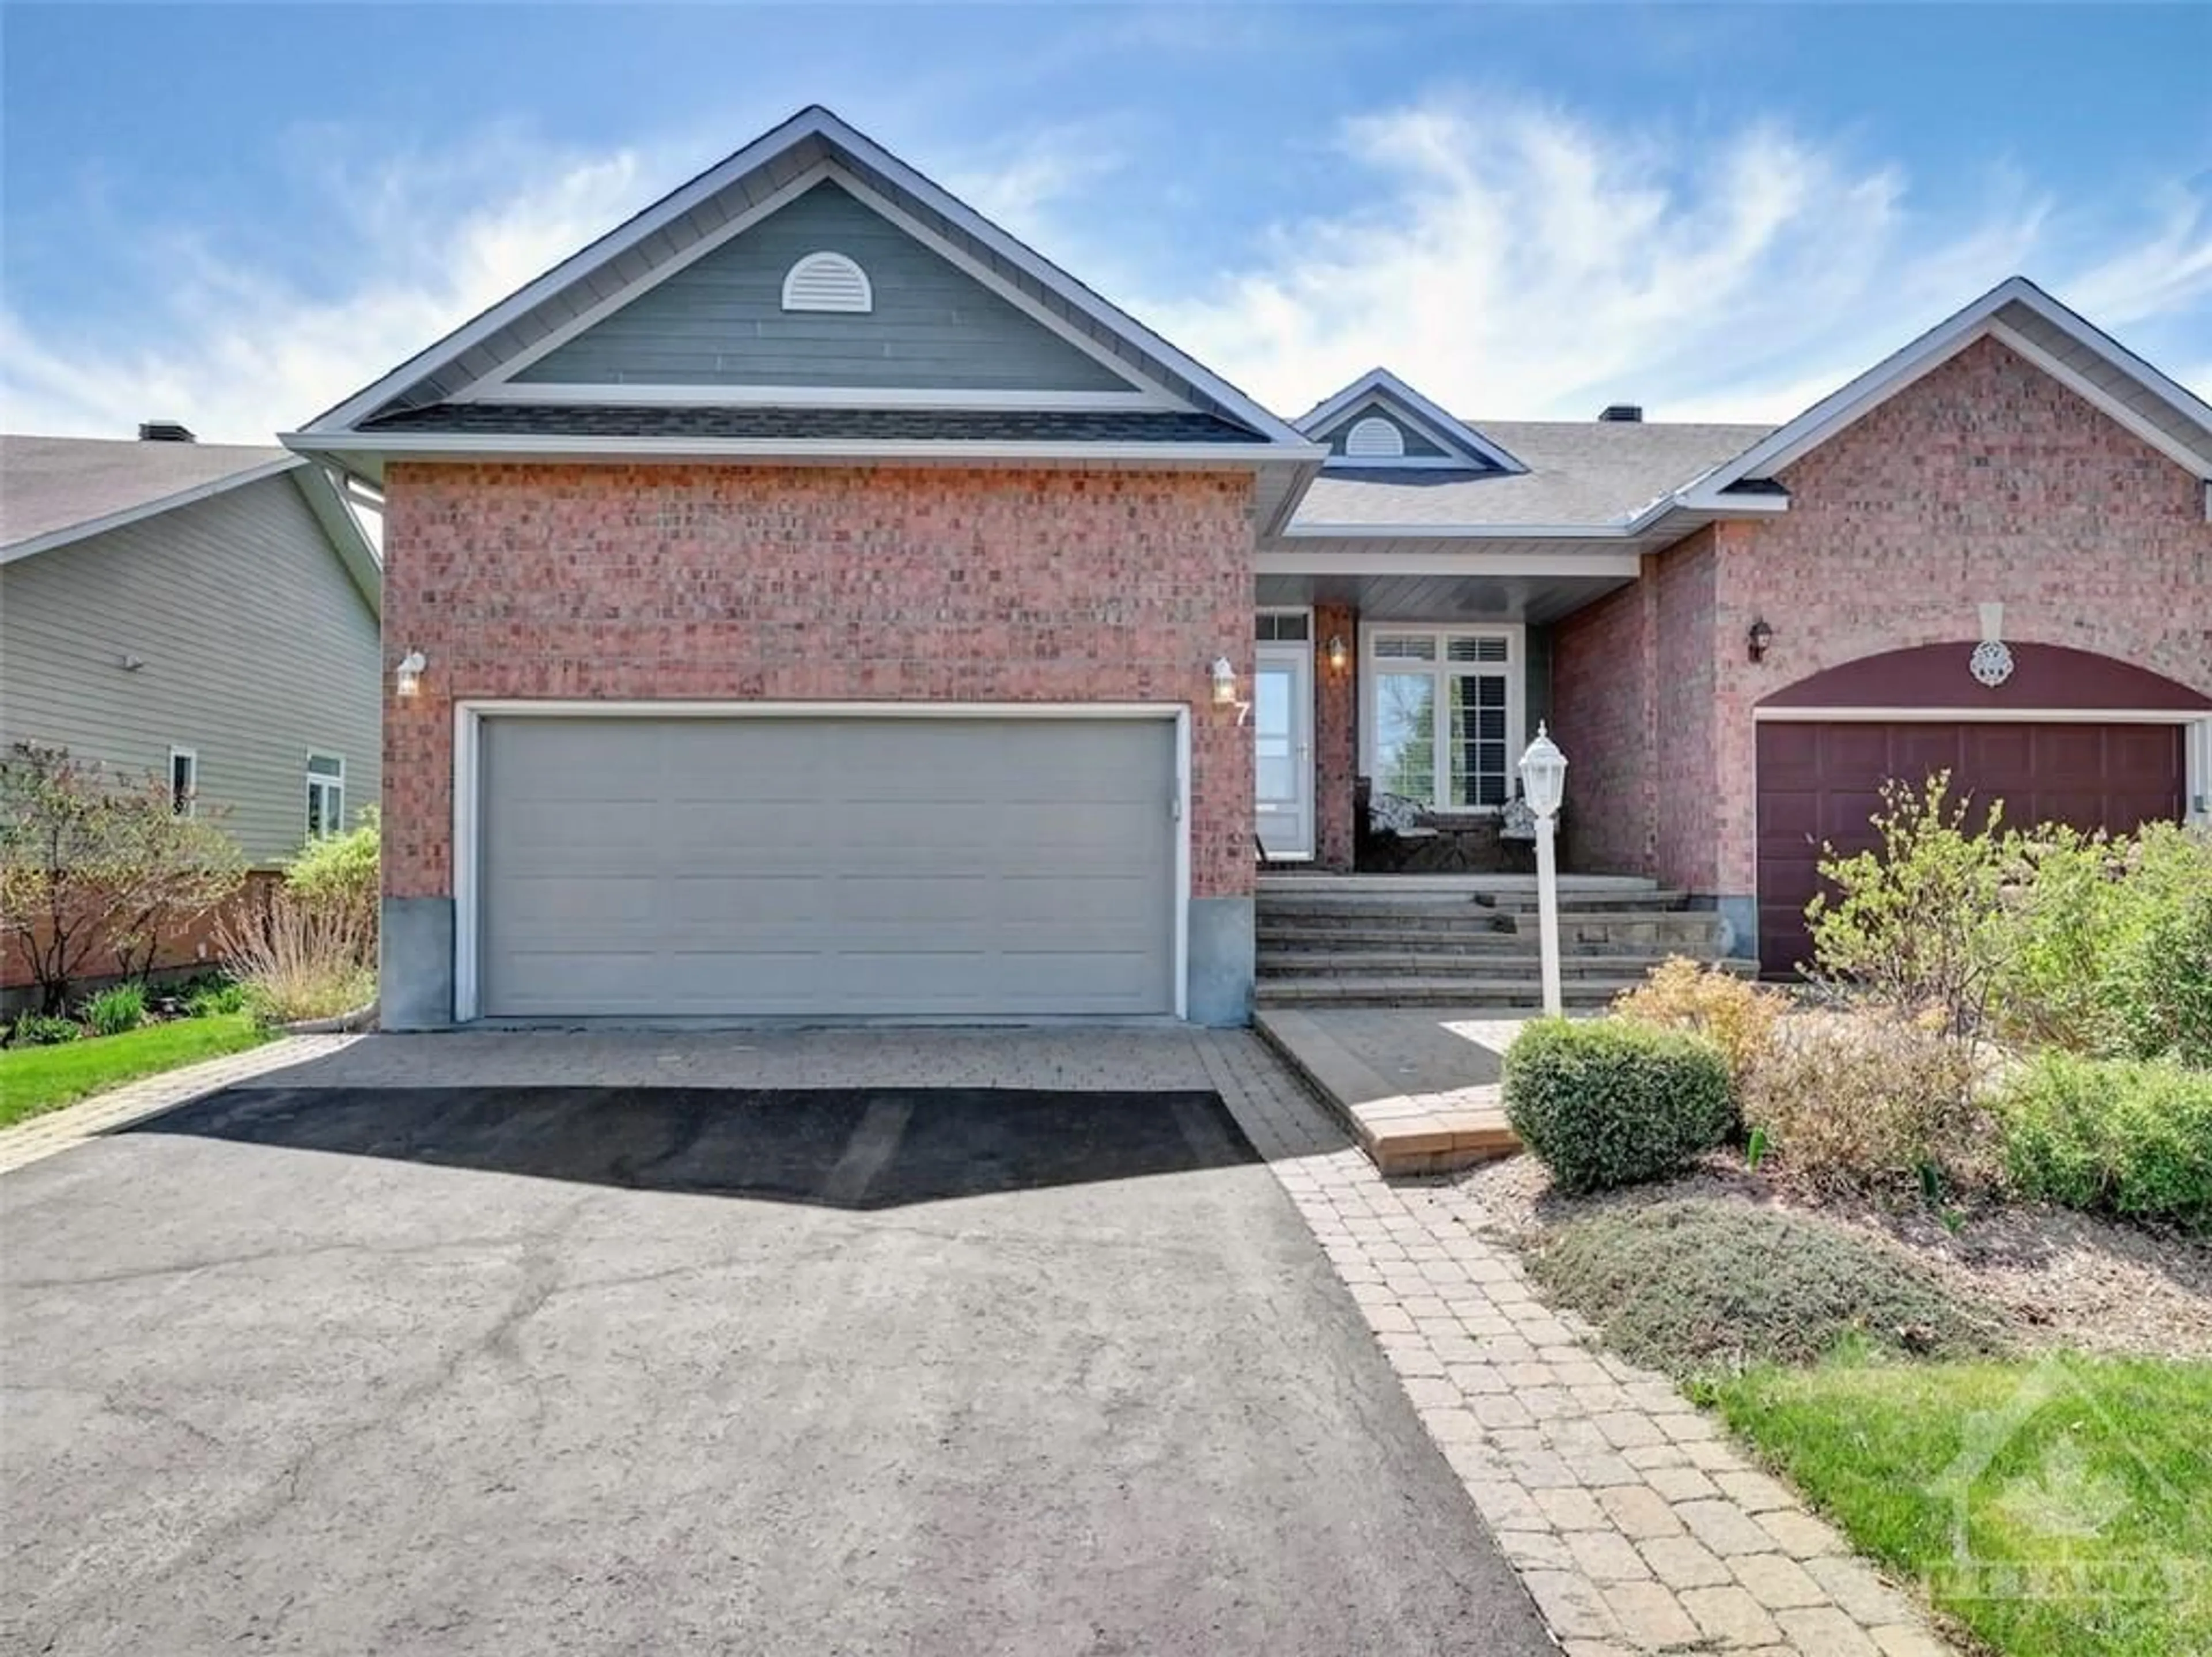 Home with brick exterior material for 7 SABLE RUN Dr, Ottawa Ontario K2S 1W2